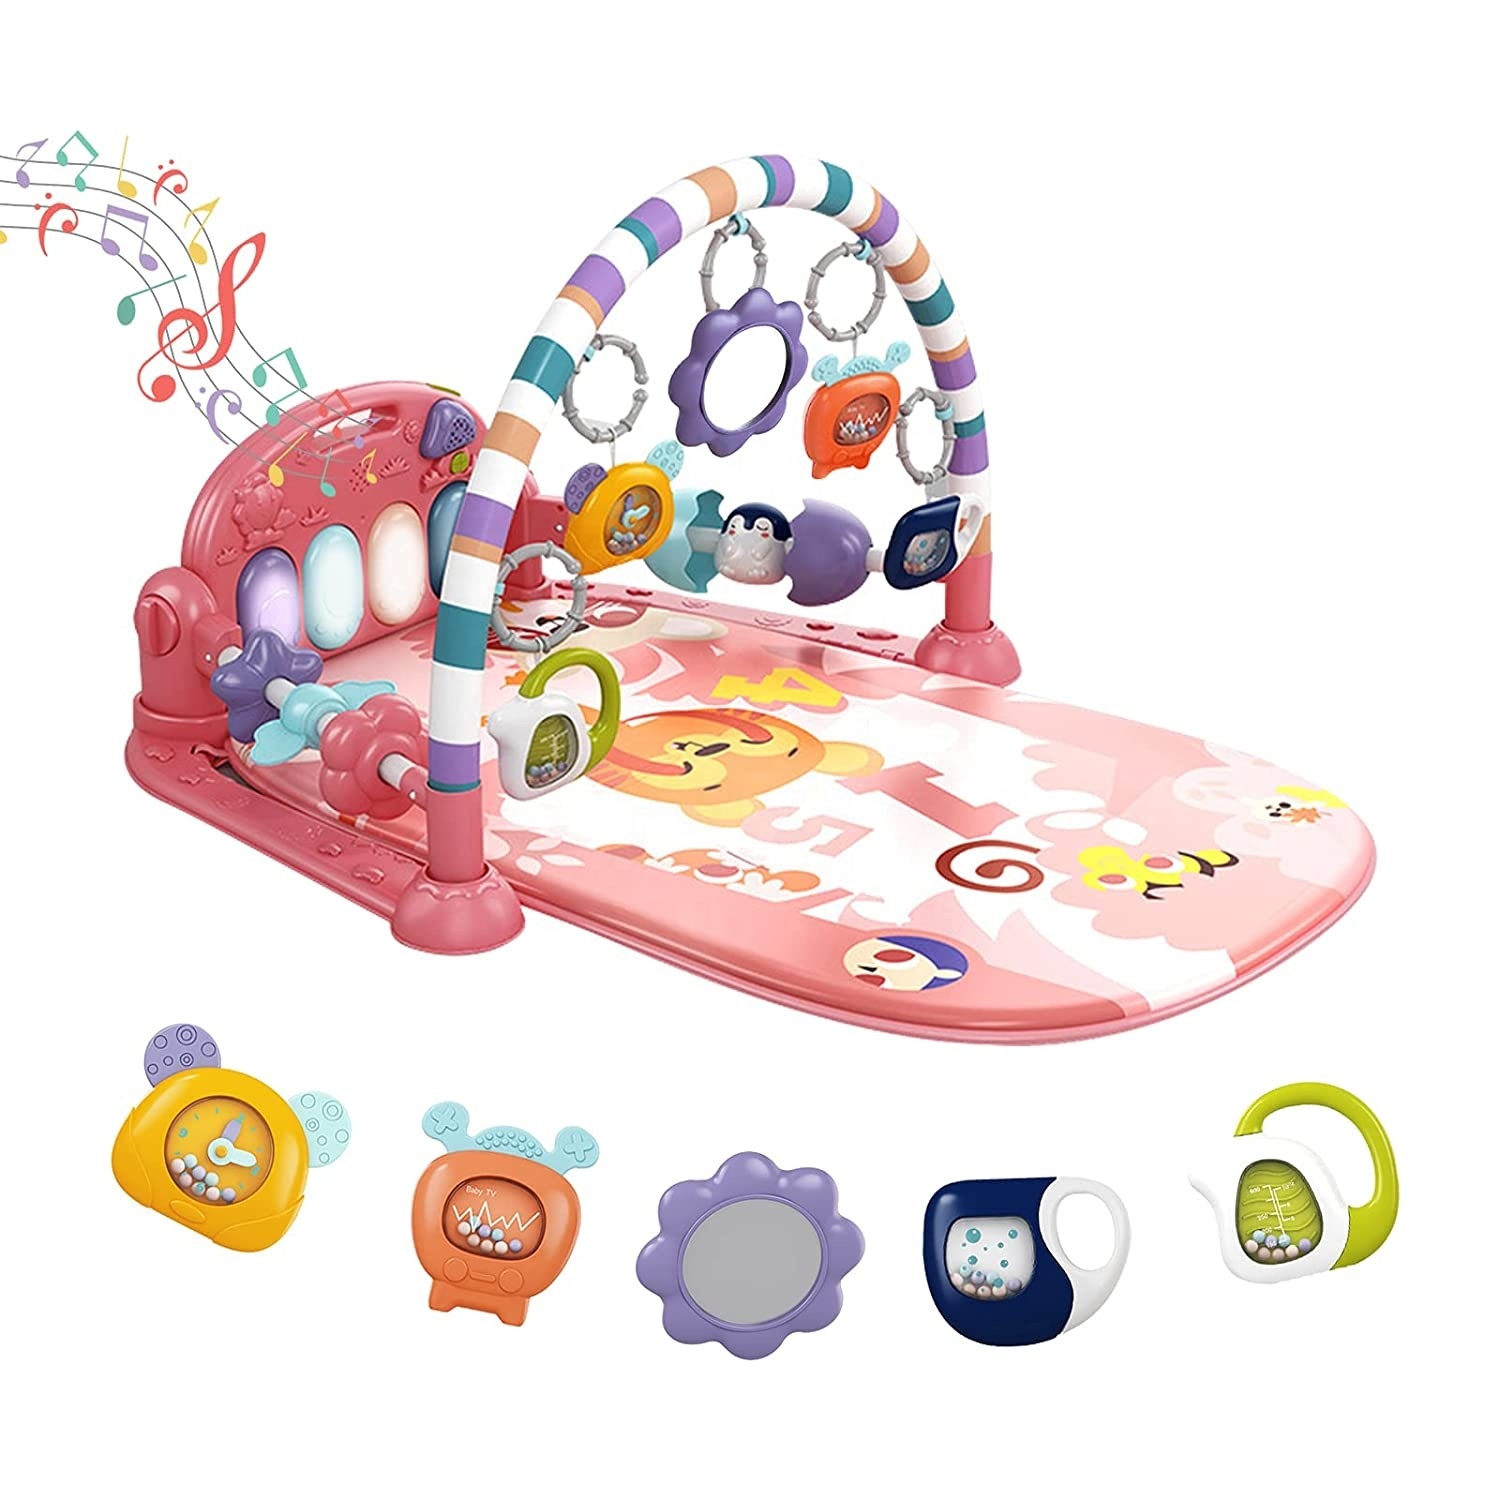 Baby Gym Play Mat Kick and Play Piano Gym with 5 Sensory Teether Toys Musical Activity Center Early Development Gift for Newborn Babies